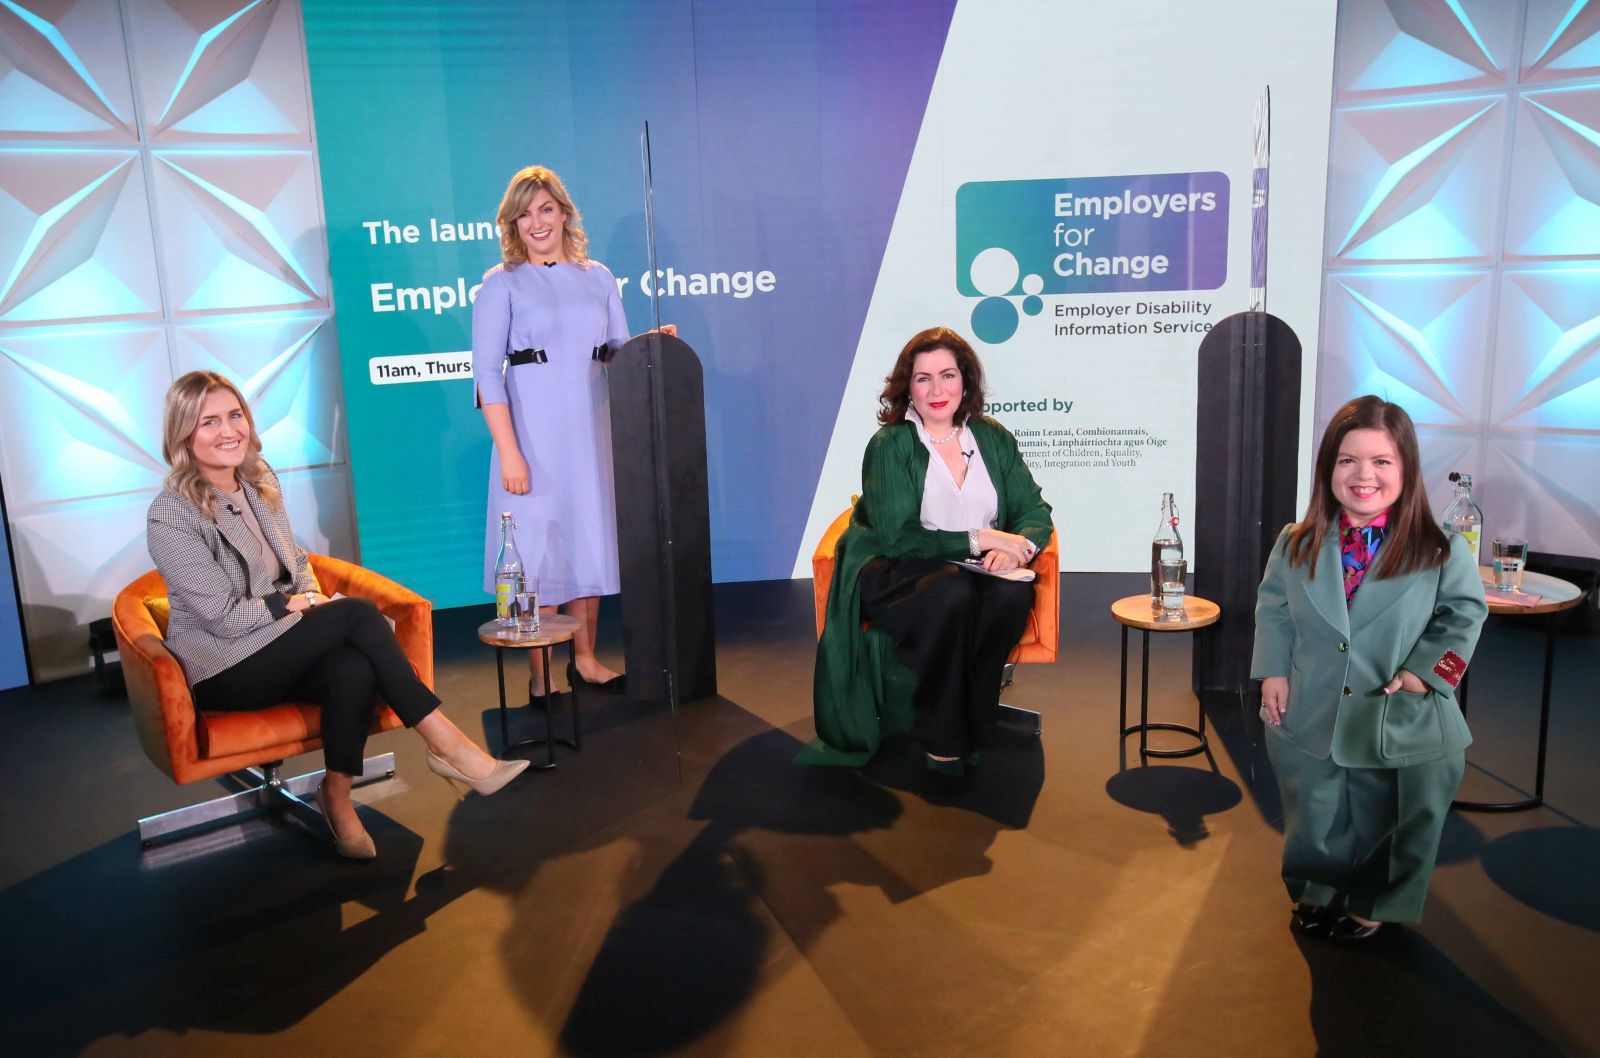 Image from Launch of Employers for Change. Left to Right: Síne Breslin, Bank of Ireland, Christabelle Feeney, Director of Employers for Change, Francesca McDonagh, CEO Bank of Ireland and Sinéad Burke, CEO Tilting the Lens at the launch of Employers for Change 